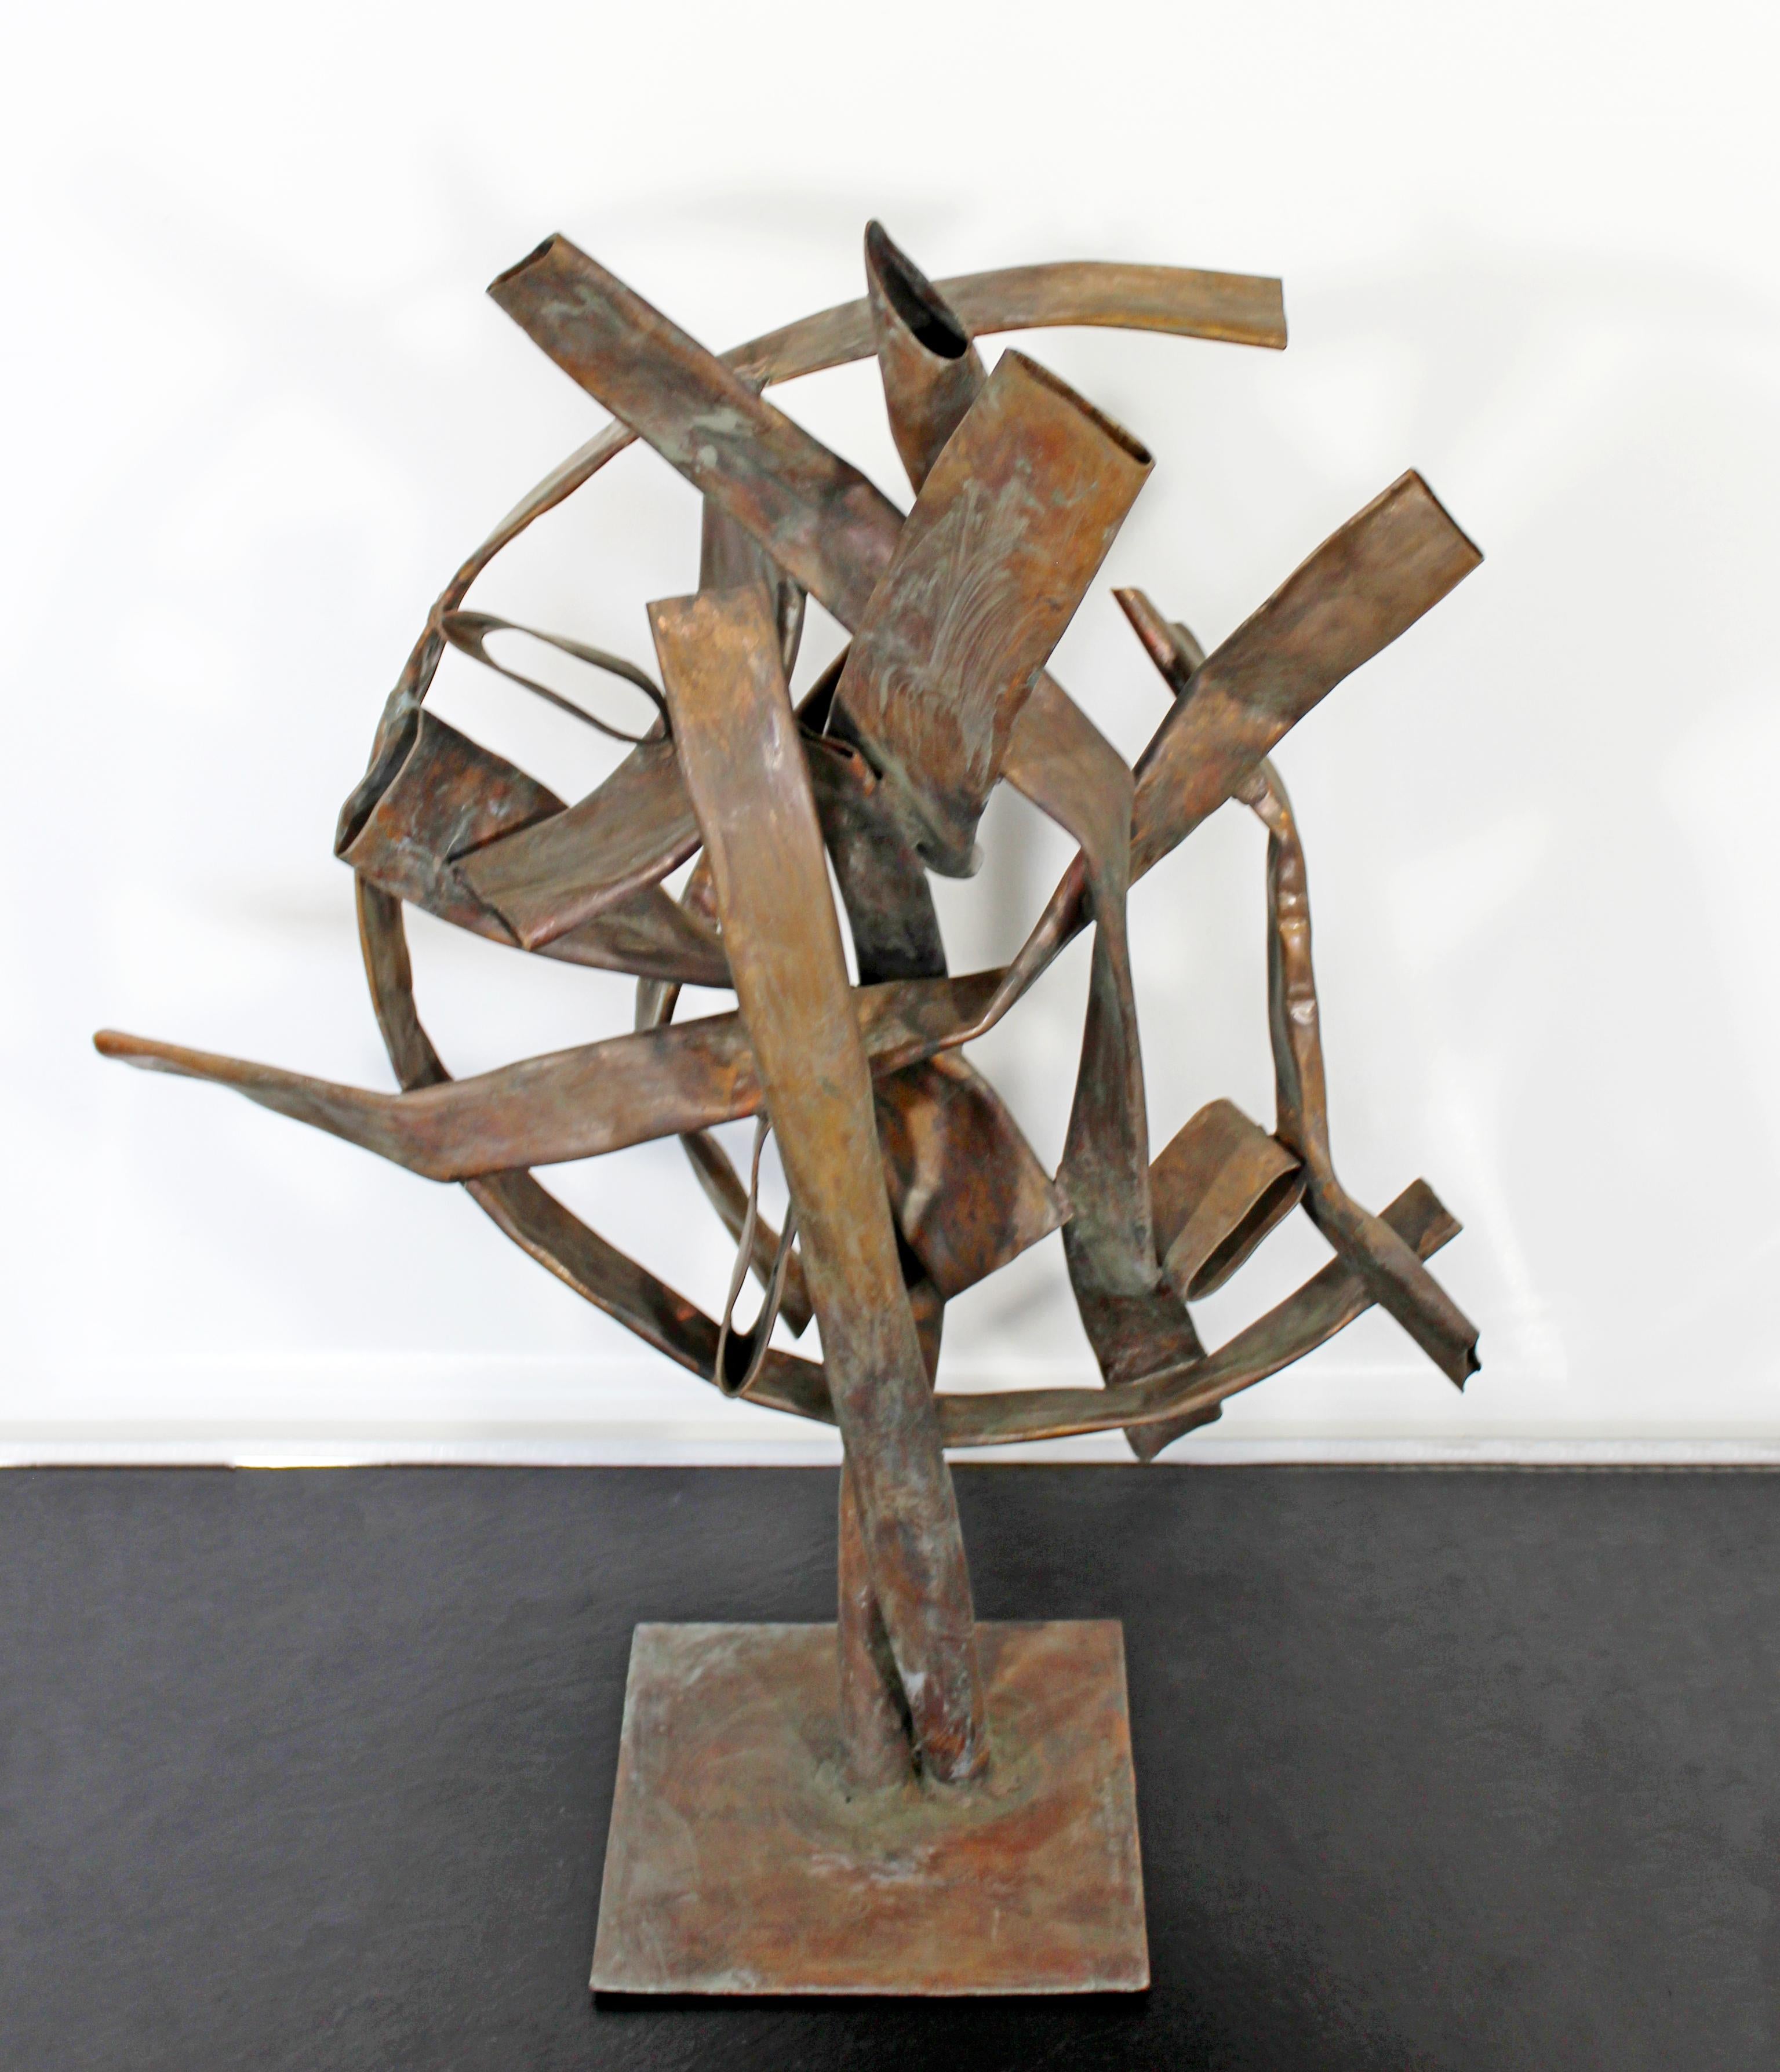 For your consideration is a beautiful, forged copper metal, abstract table sculpture, signed by Robert D. Hansen, dated 2016. In excellent condition. The dimensions are 19